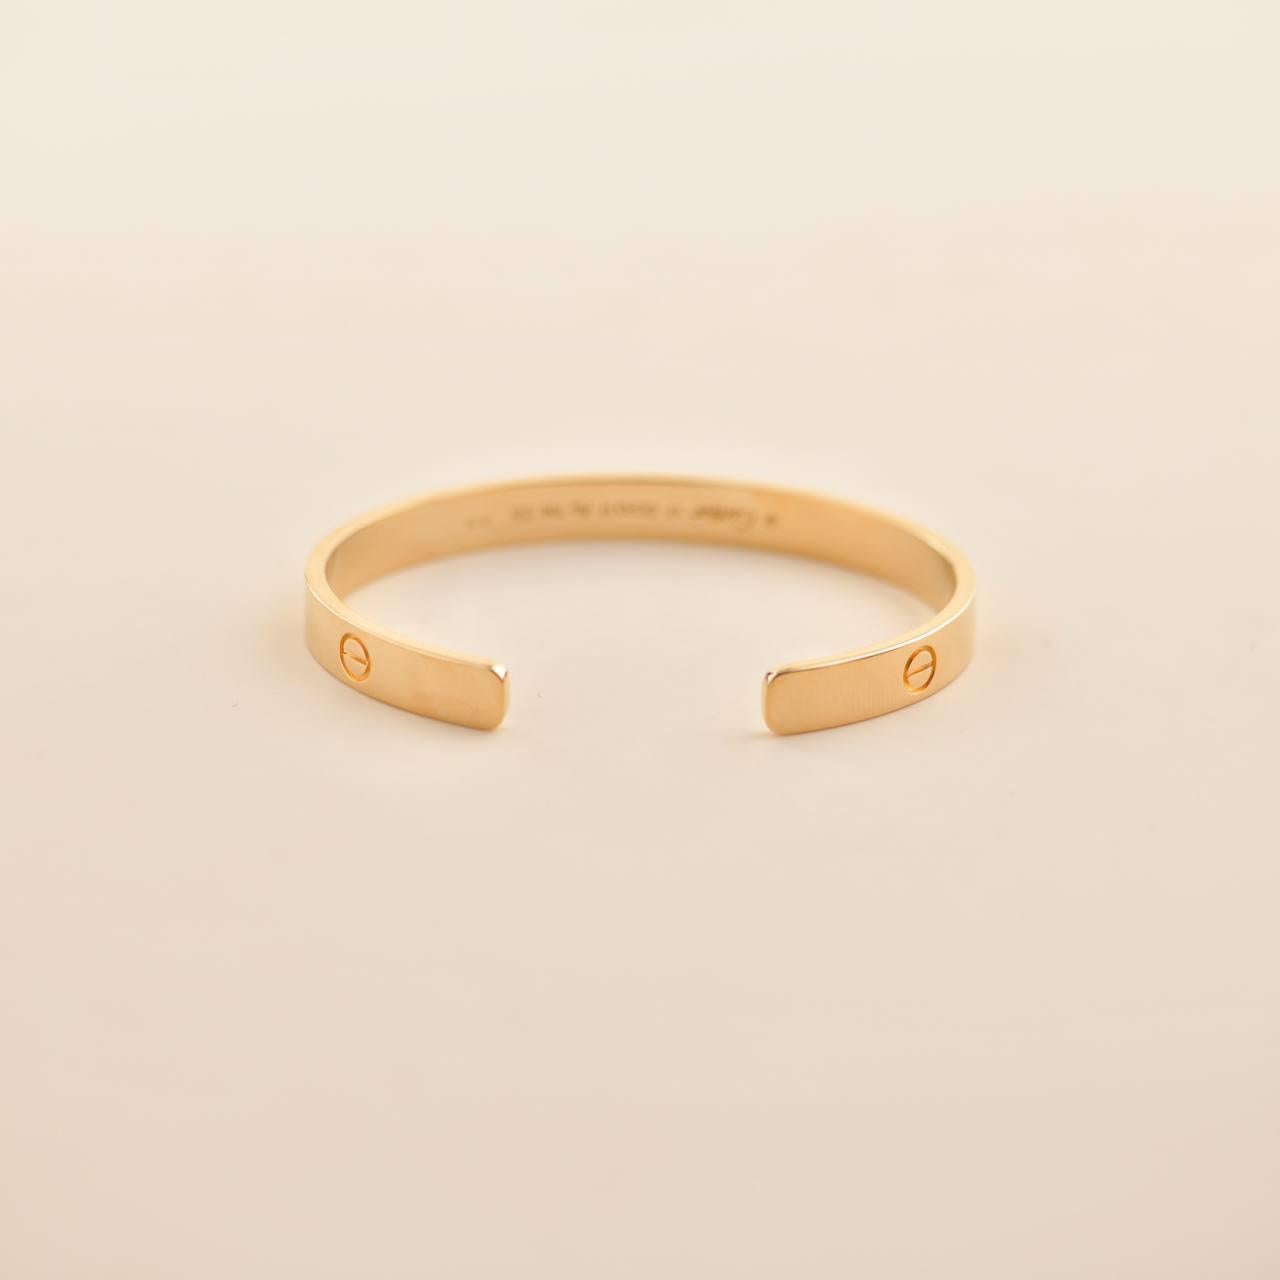 Cartier Yellow Gold Cuff Love Bracelet Size 17 In Excellent Condition For Sale In Banbury, GB